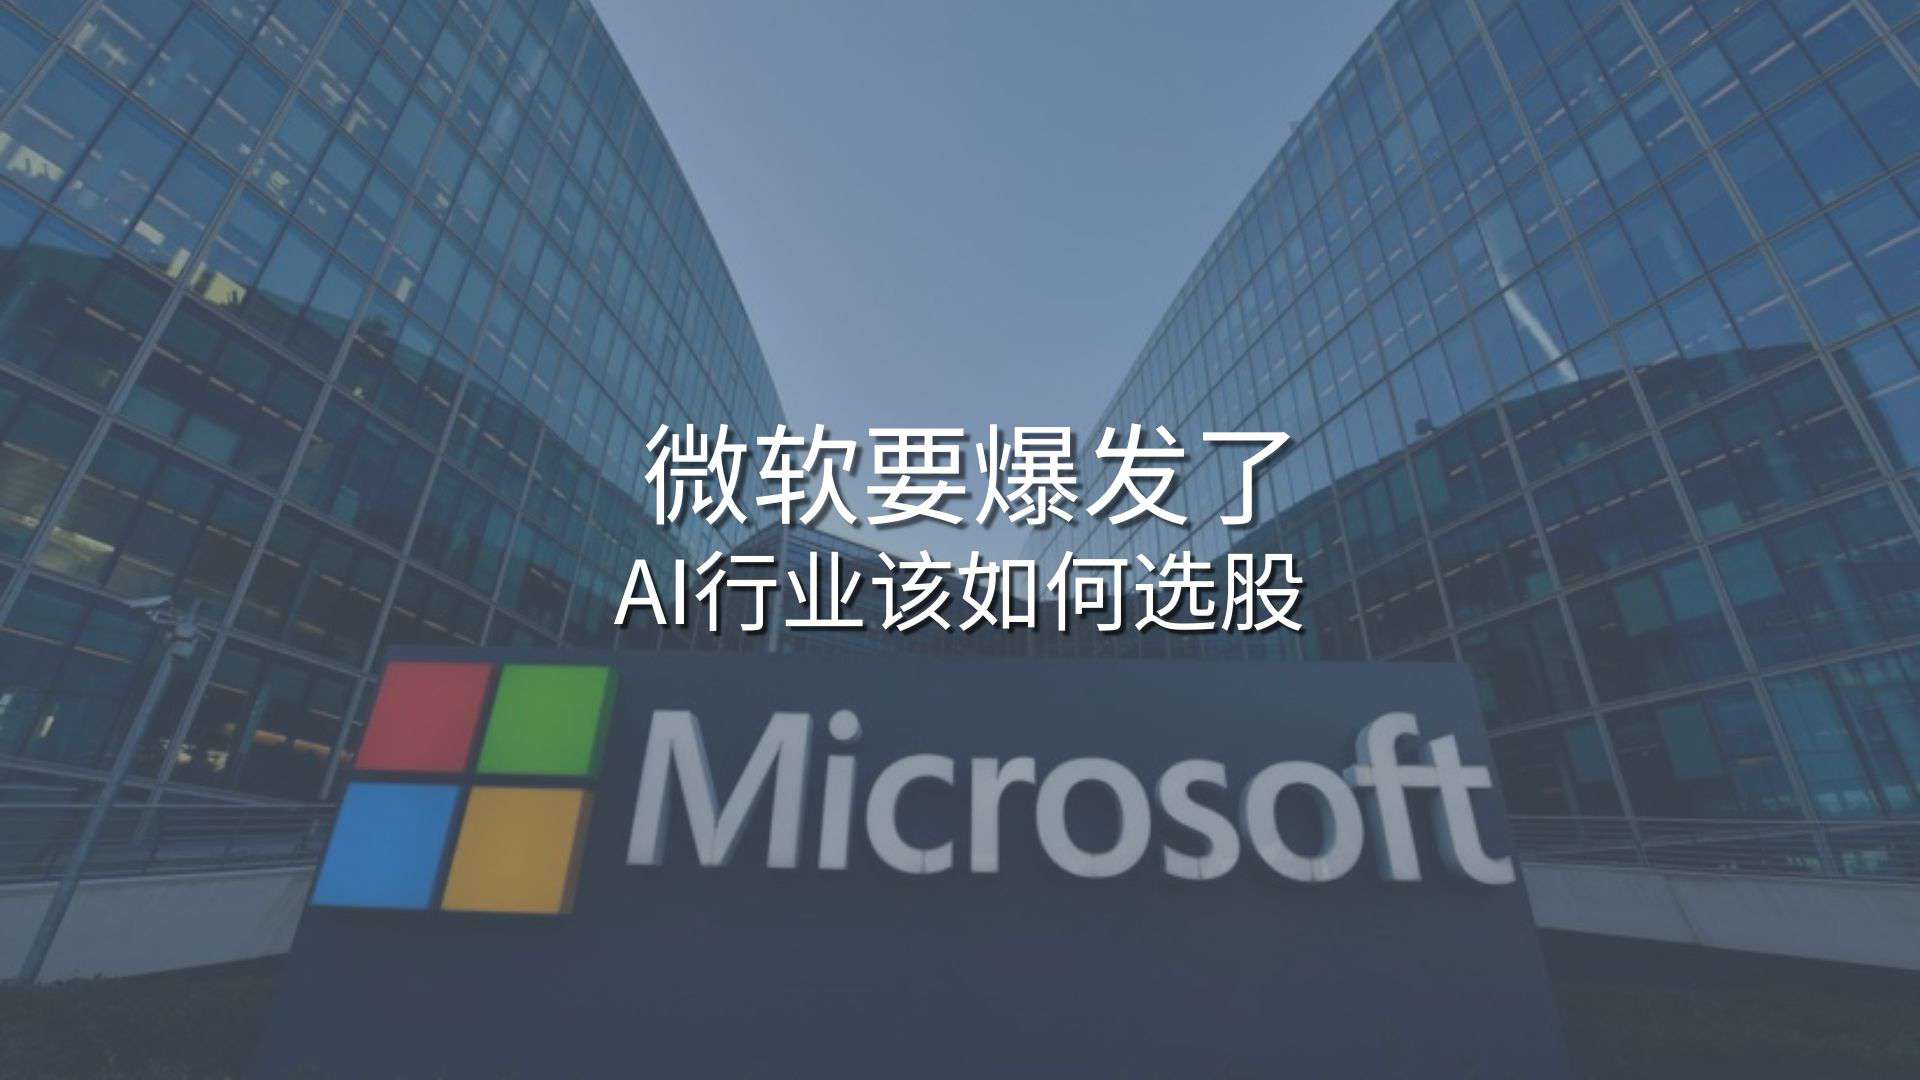 Read more about the article 微软要爆发了，AI行业该如何选股 | Ai Financial